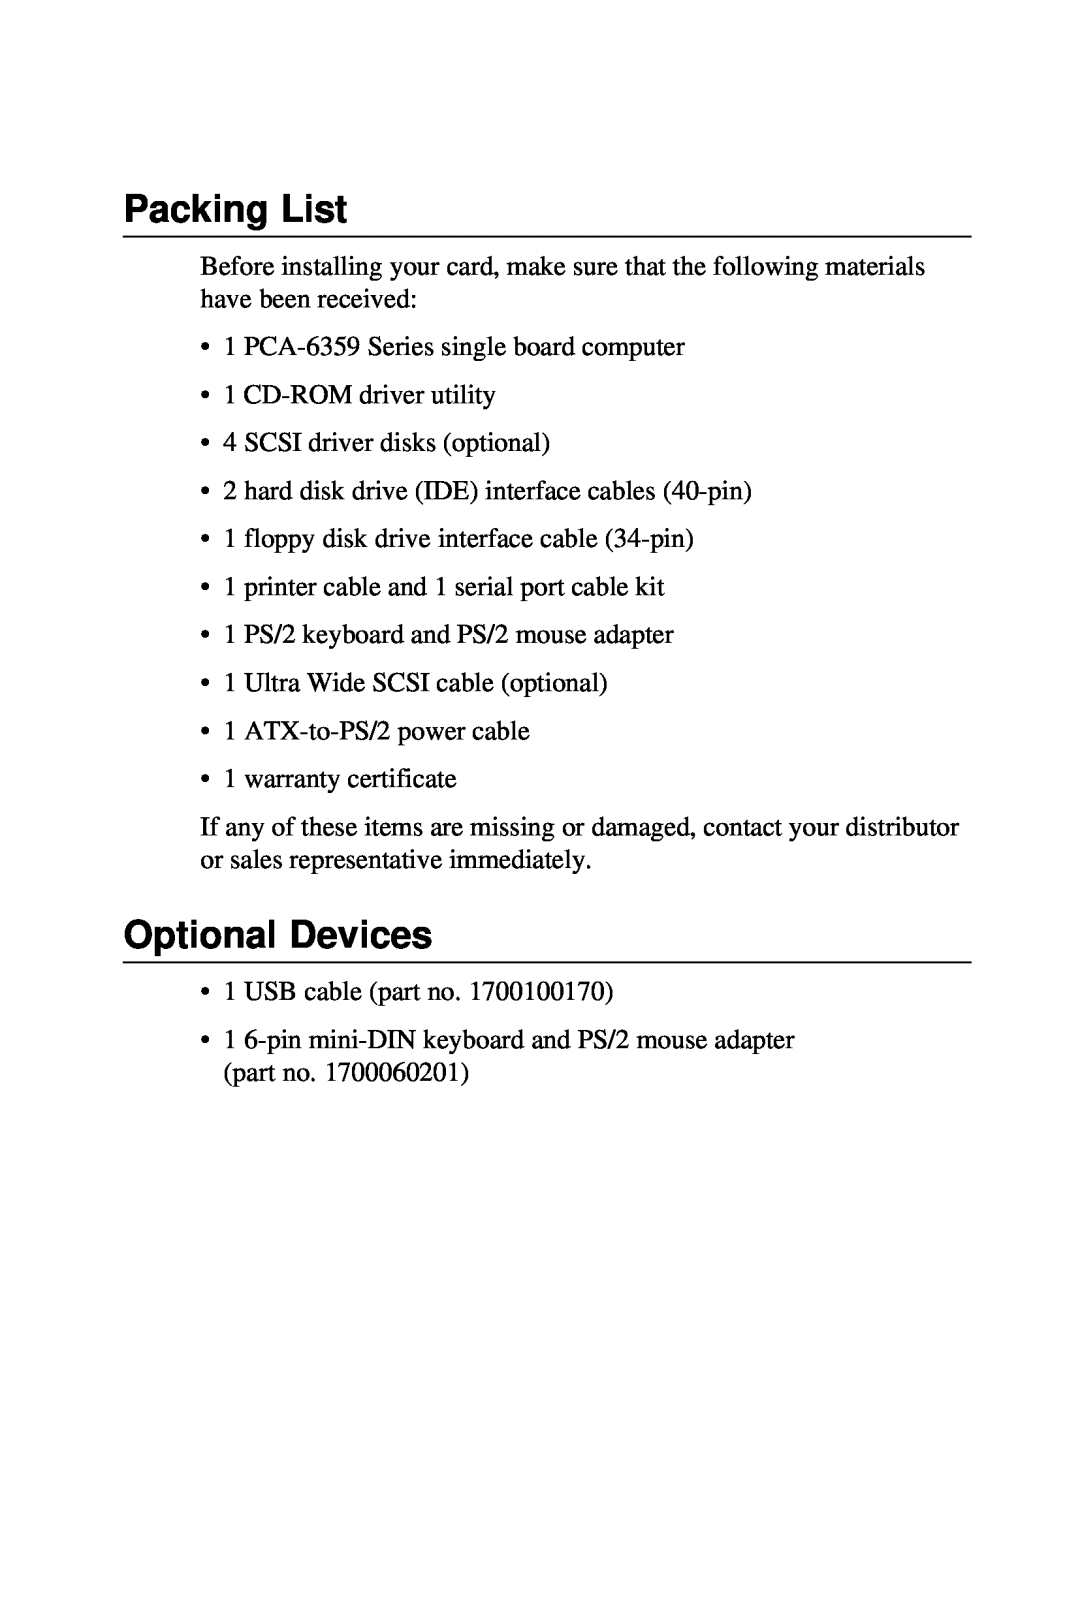 Advantech PCA-6359 user manual Packing List, Optional Devices 